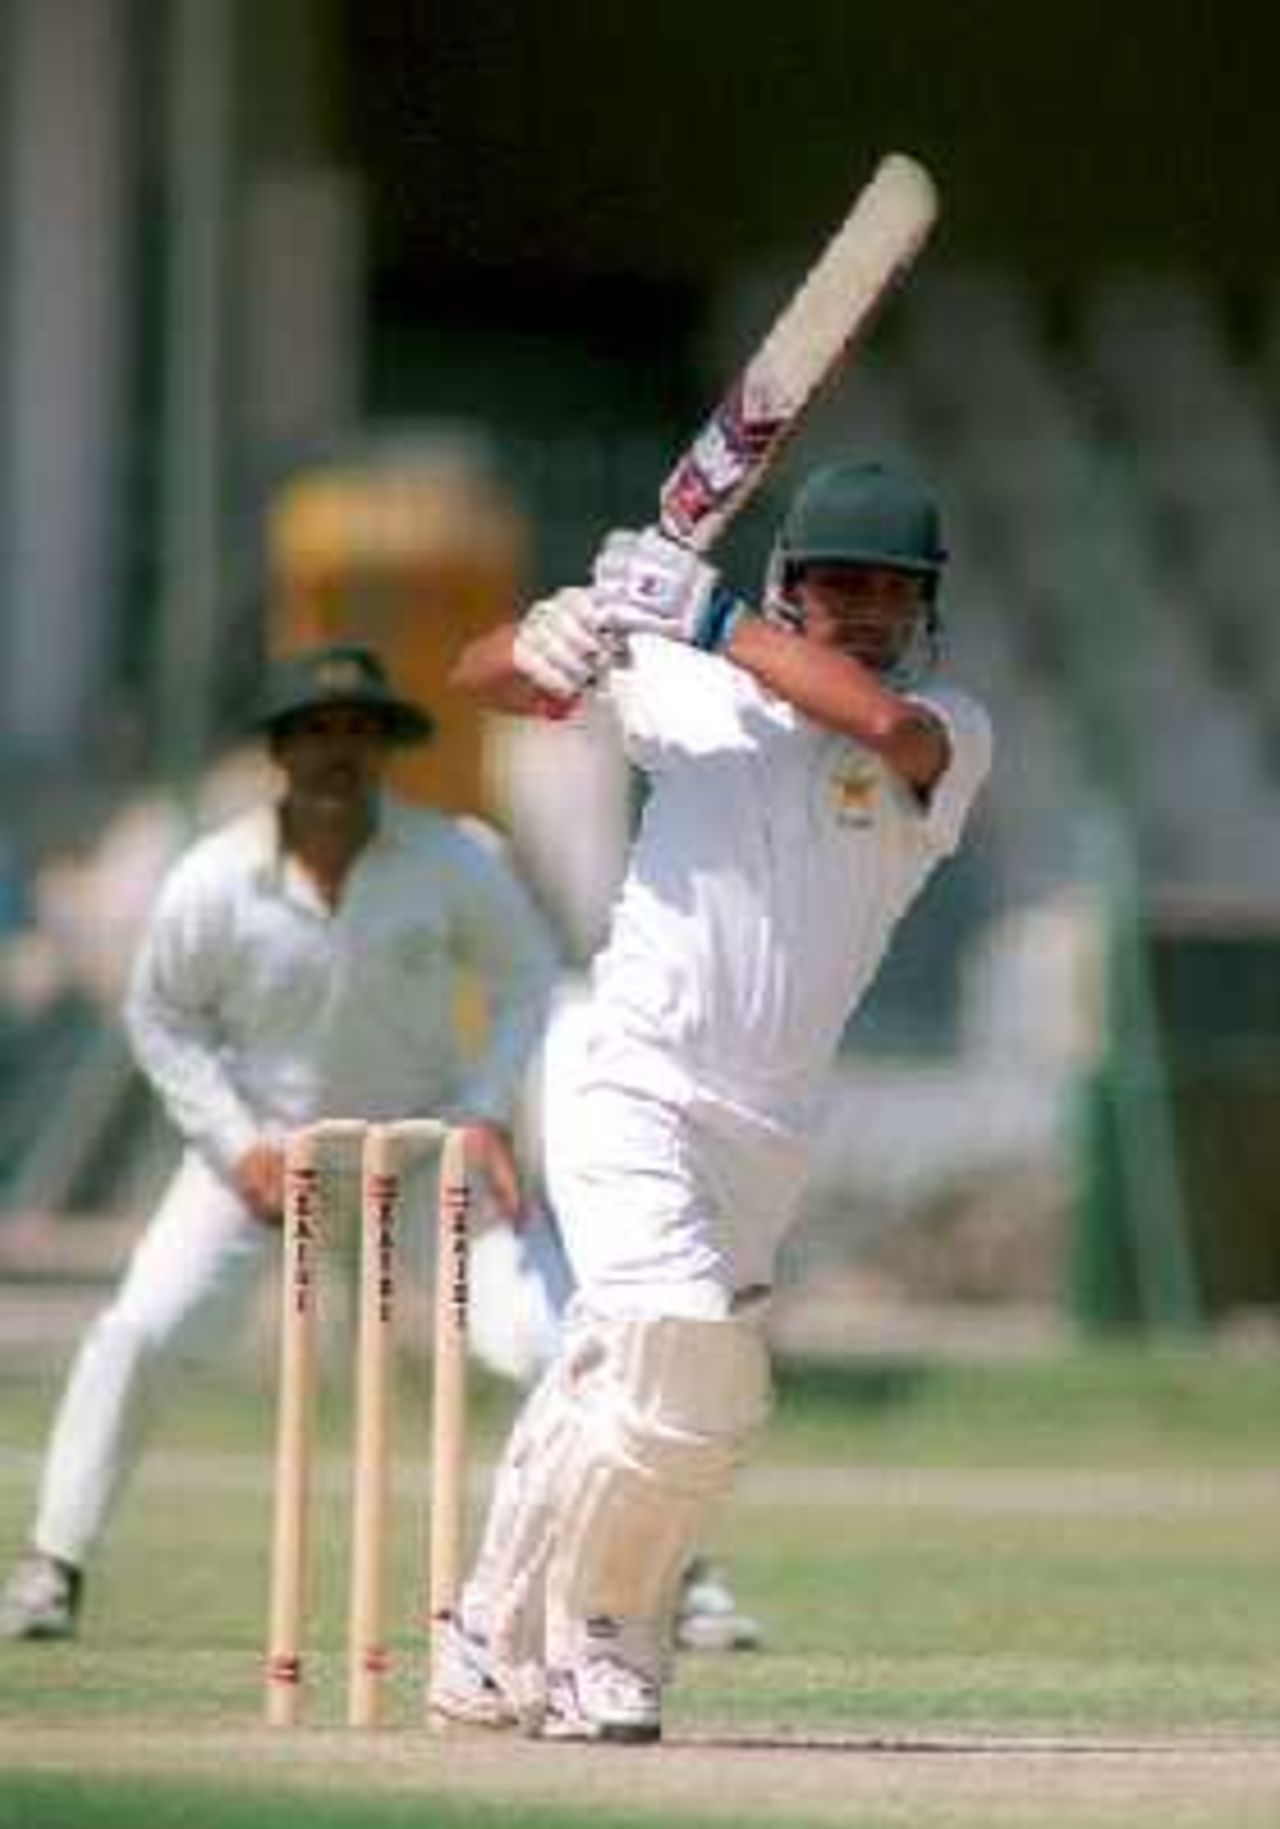 HBL's Imran Farhat plays an on-drive against National Bank at the Gaddafi Staium, Lahore. 6 April 2000.